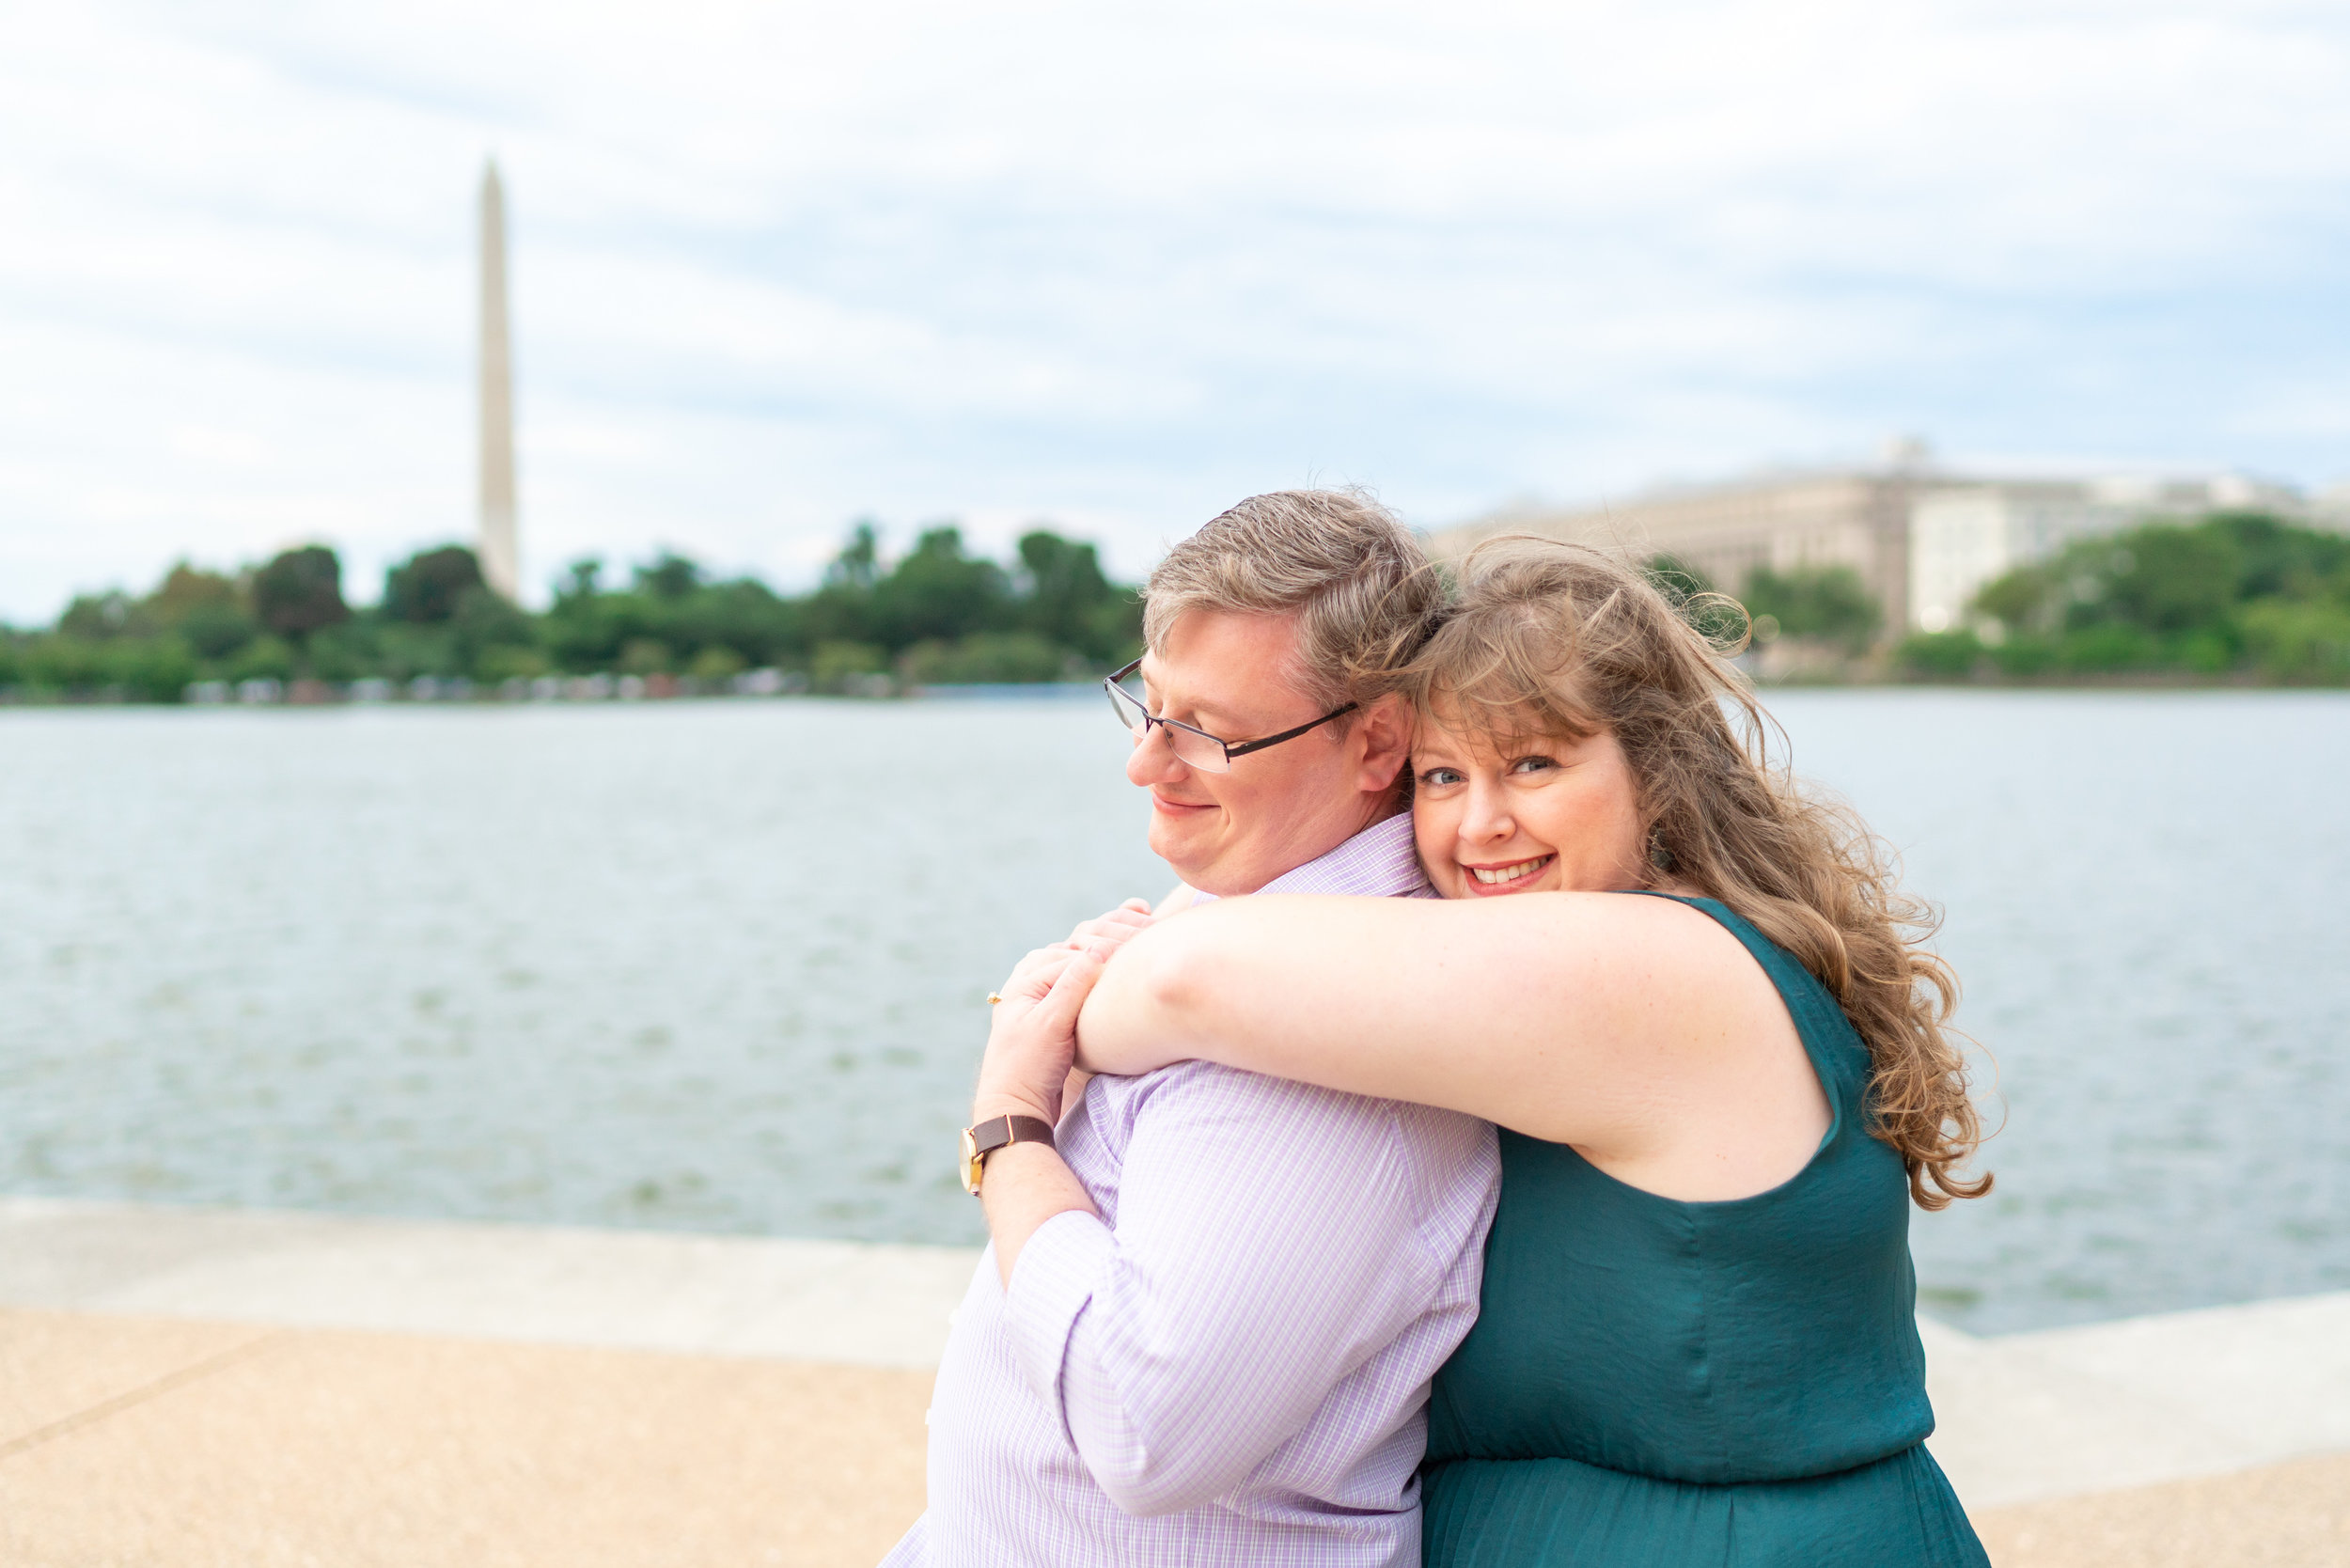 Engagement photos at the foot of the Jefferson memorial